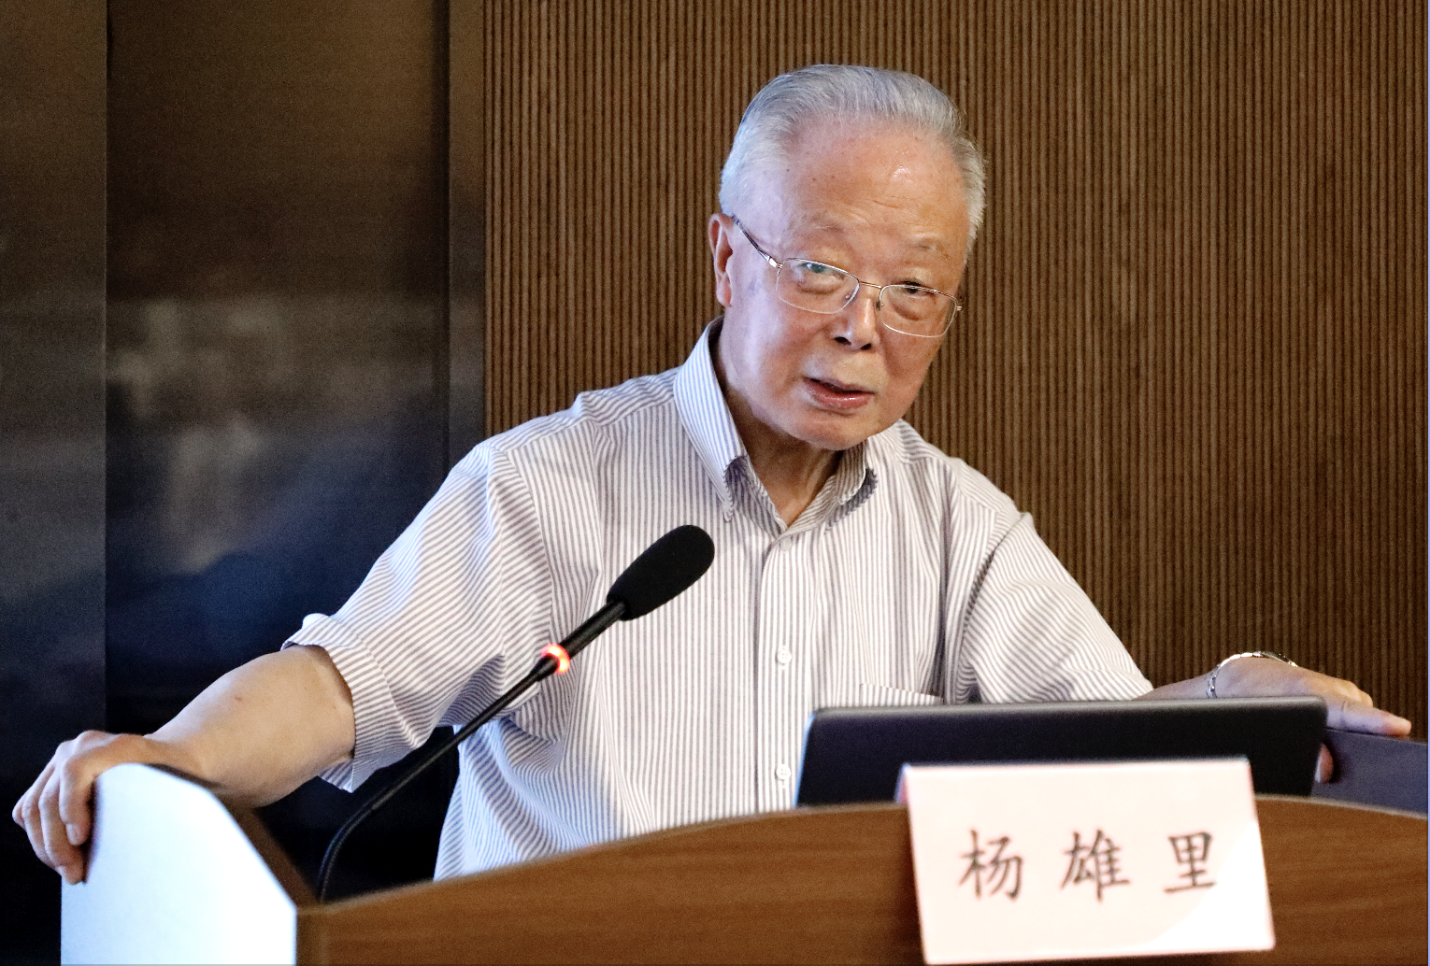 Academician Xiongli YANG gives lecture on human intelligence and artificial intelligence